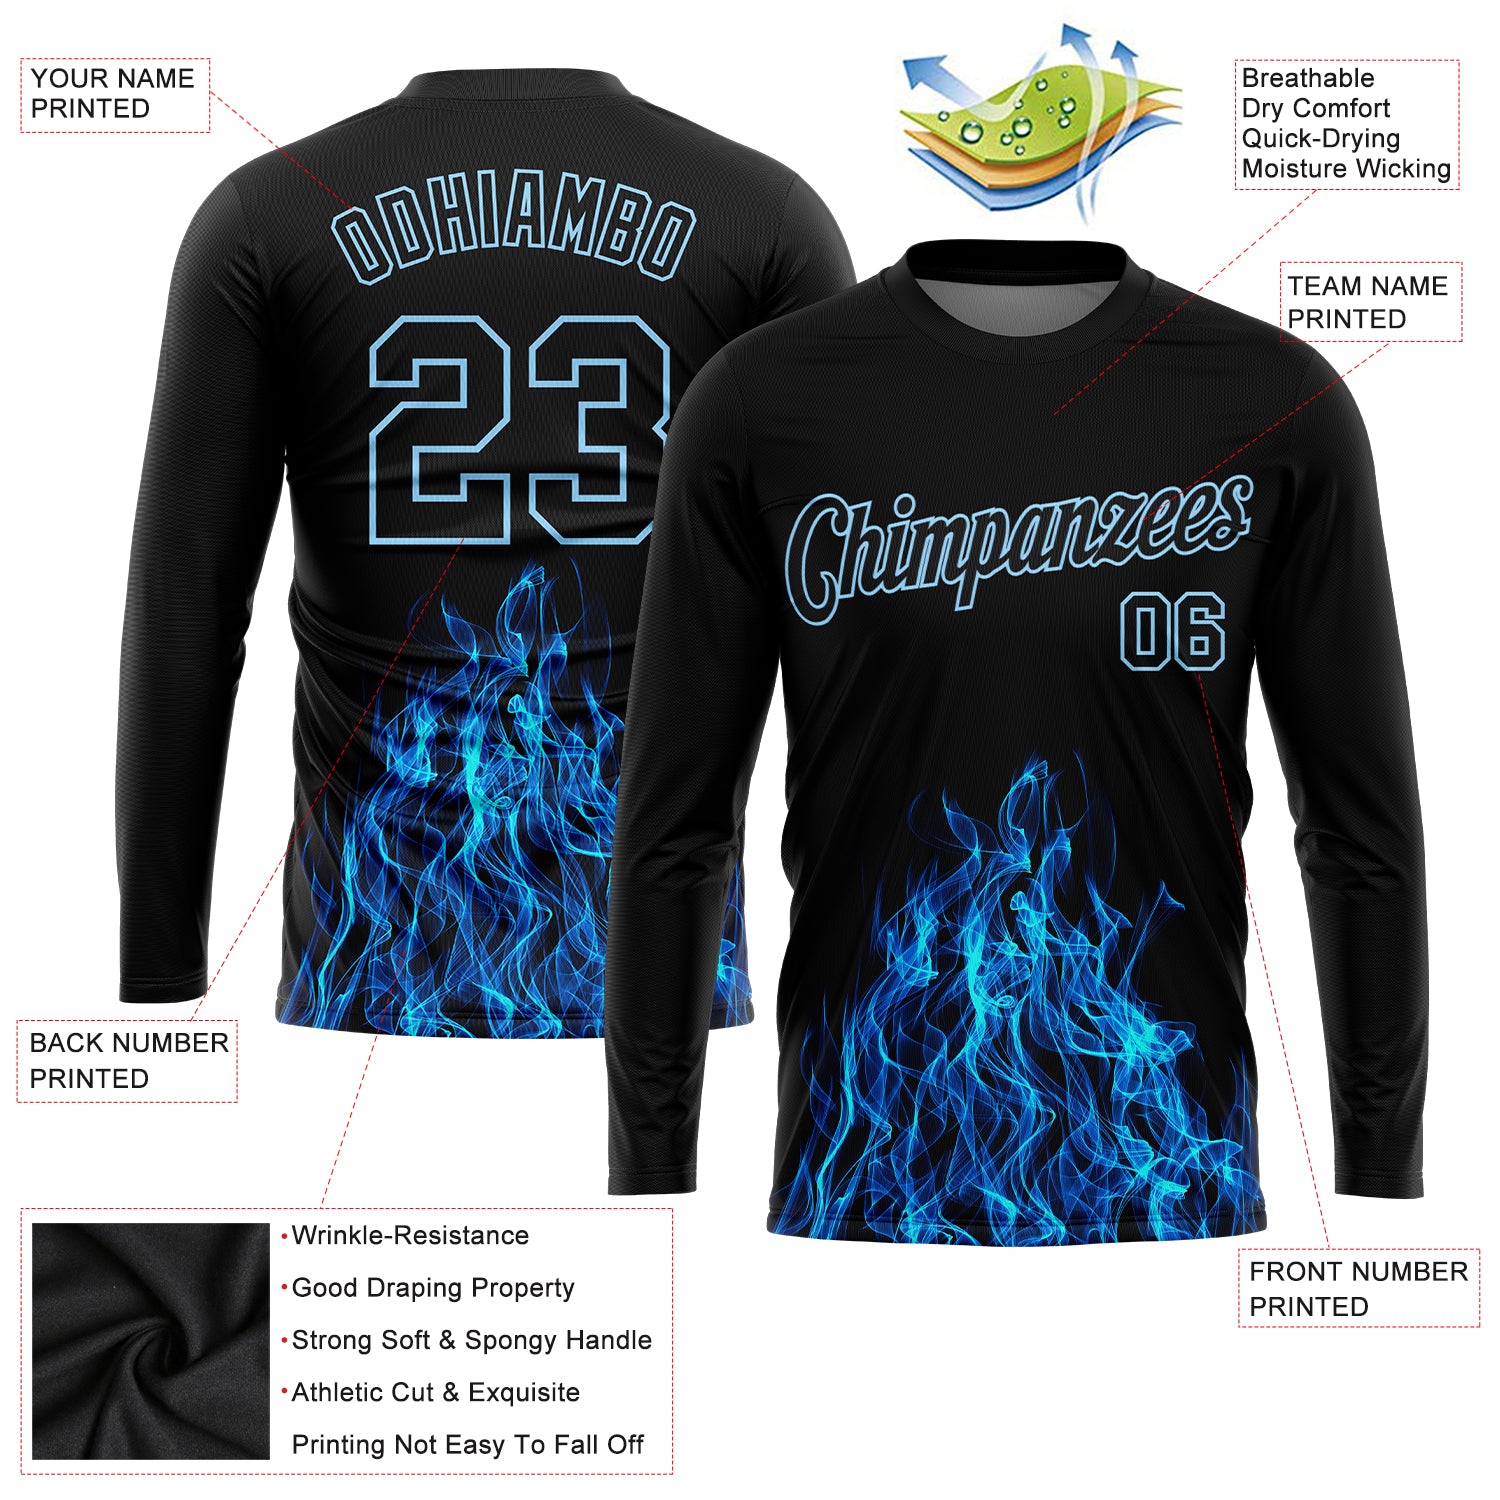  Custom Baseball City Night Skyline Jerseys 3D Printing  Personalize Your Name& Number for Fans Gifts Jersey Men Women Youth S-5XL  Blue 